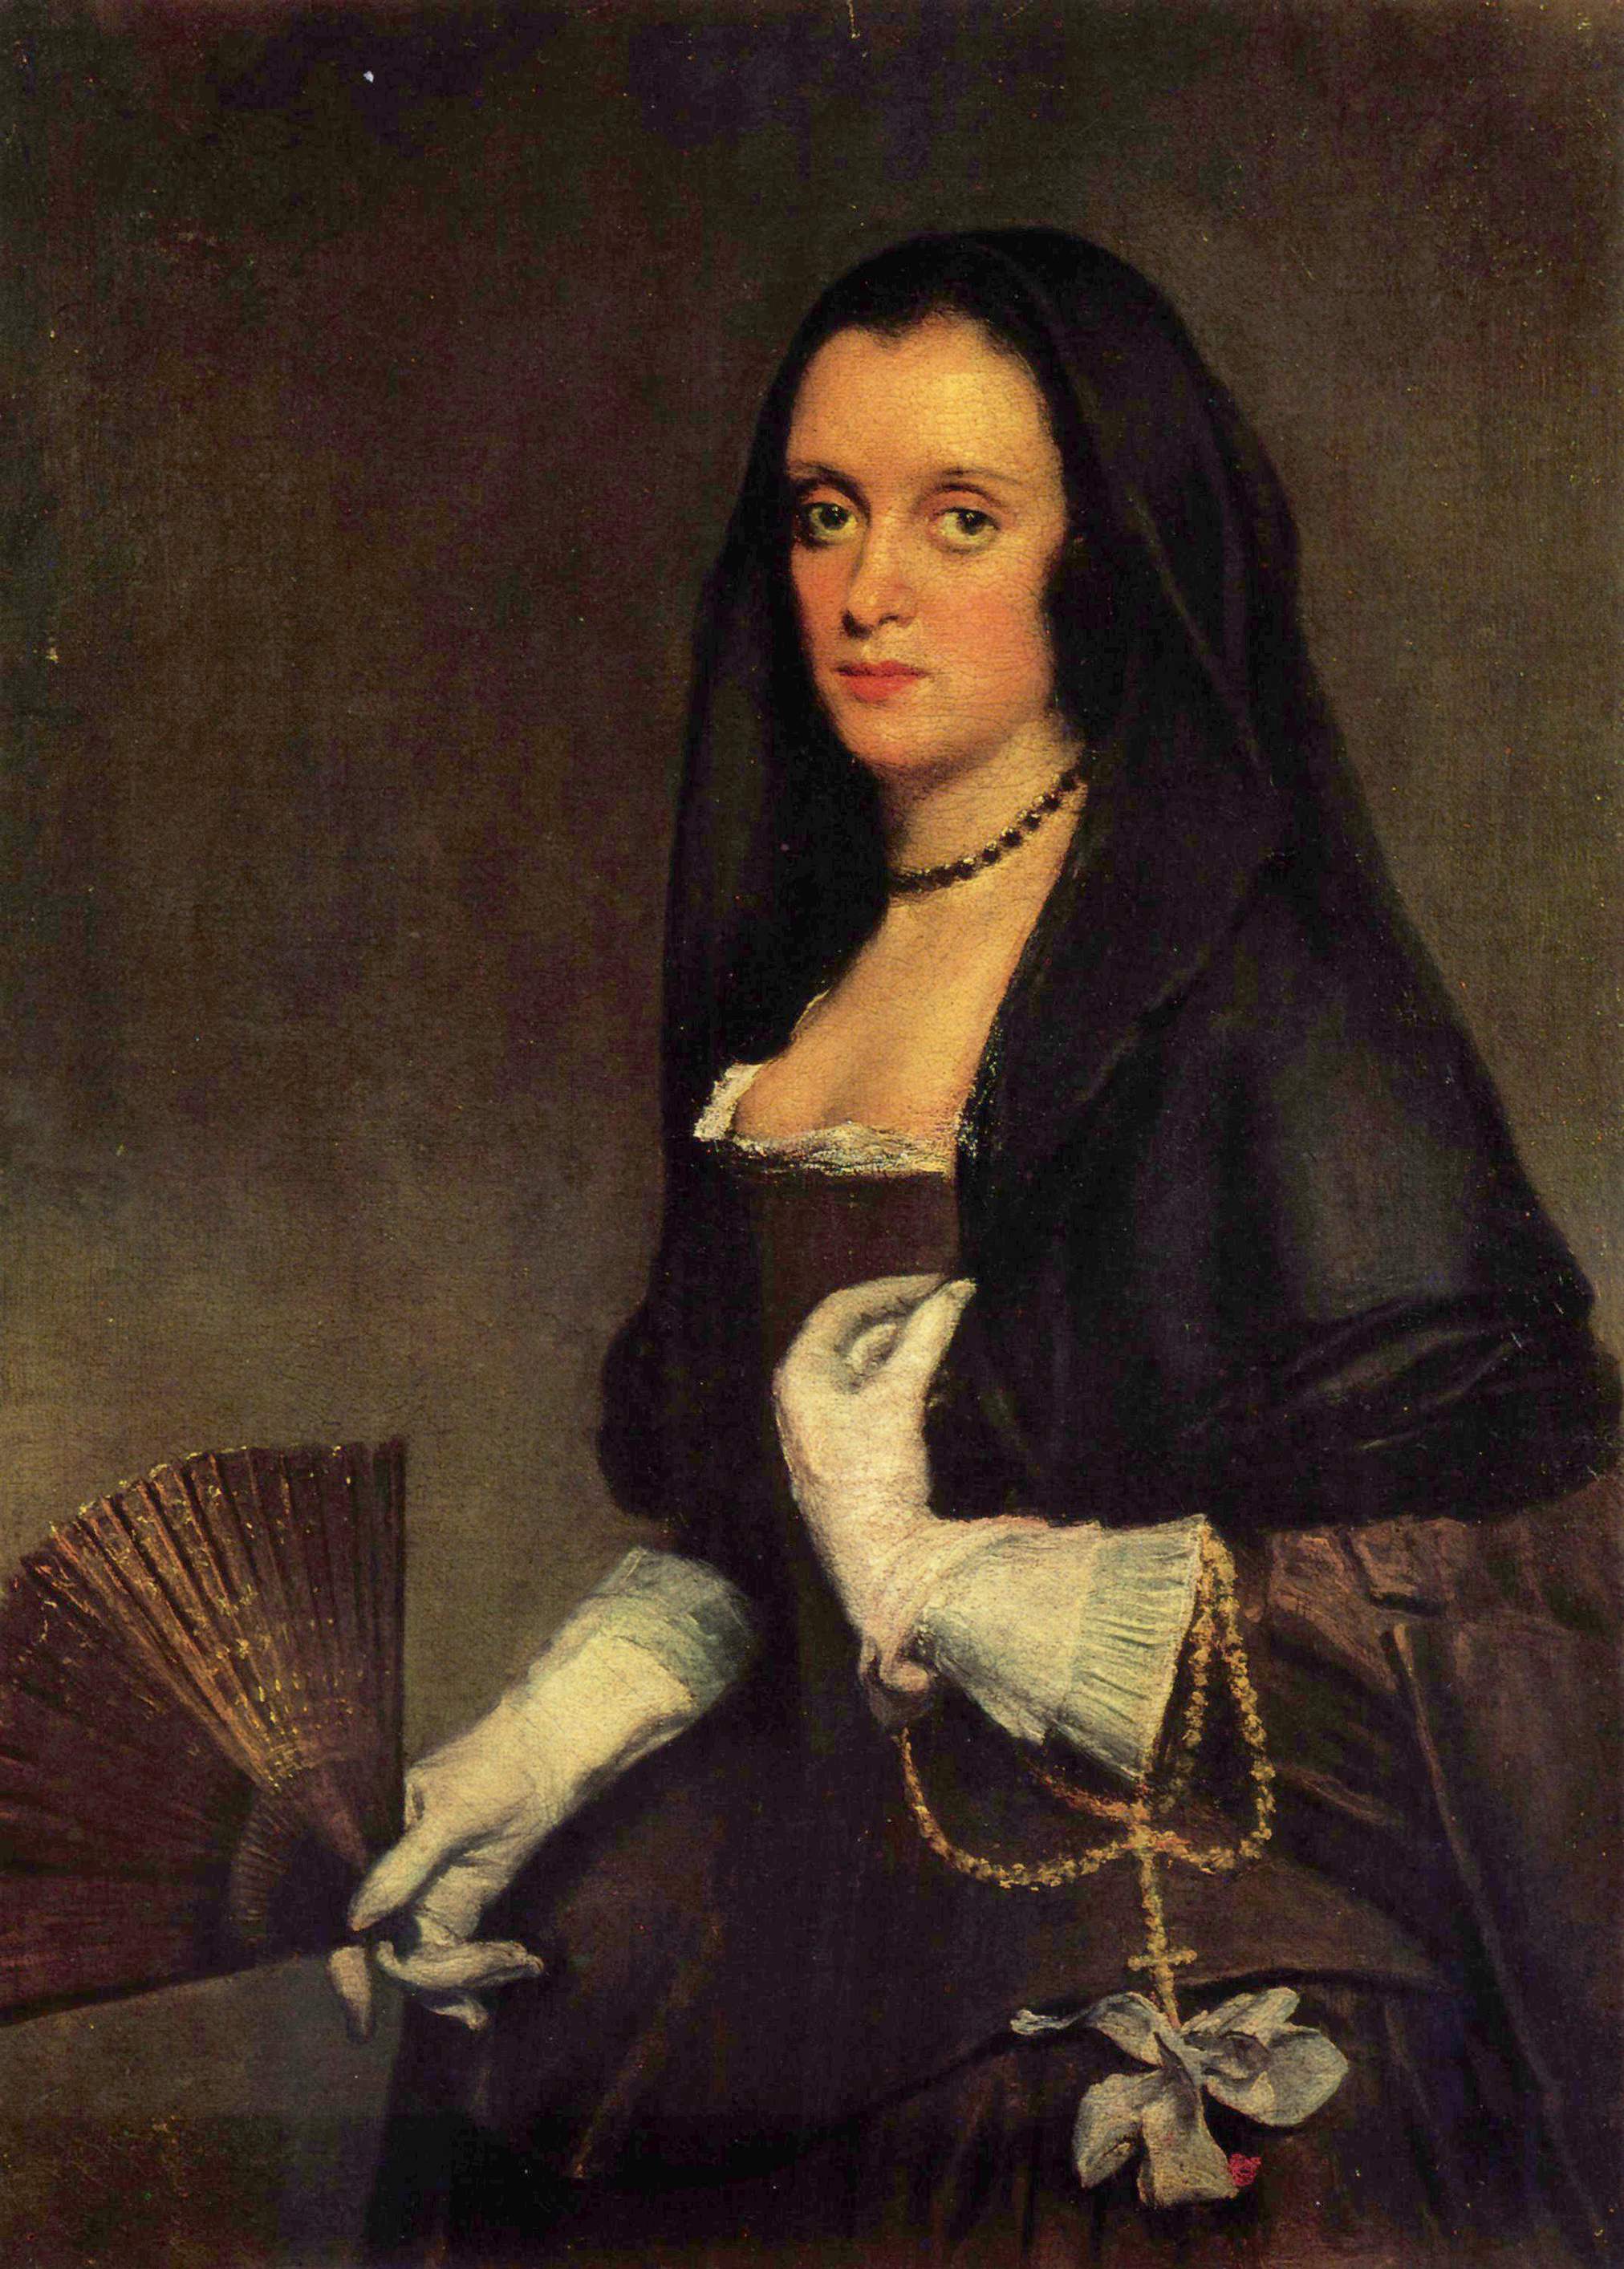 Lady with a Fan by Diego Velázquez - c. 1640 - 92.8 × 68.5 cm  Wallace Collection